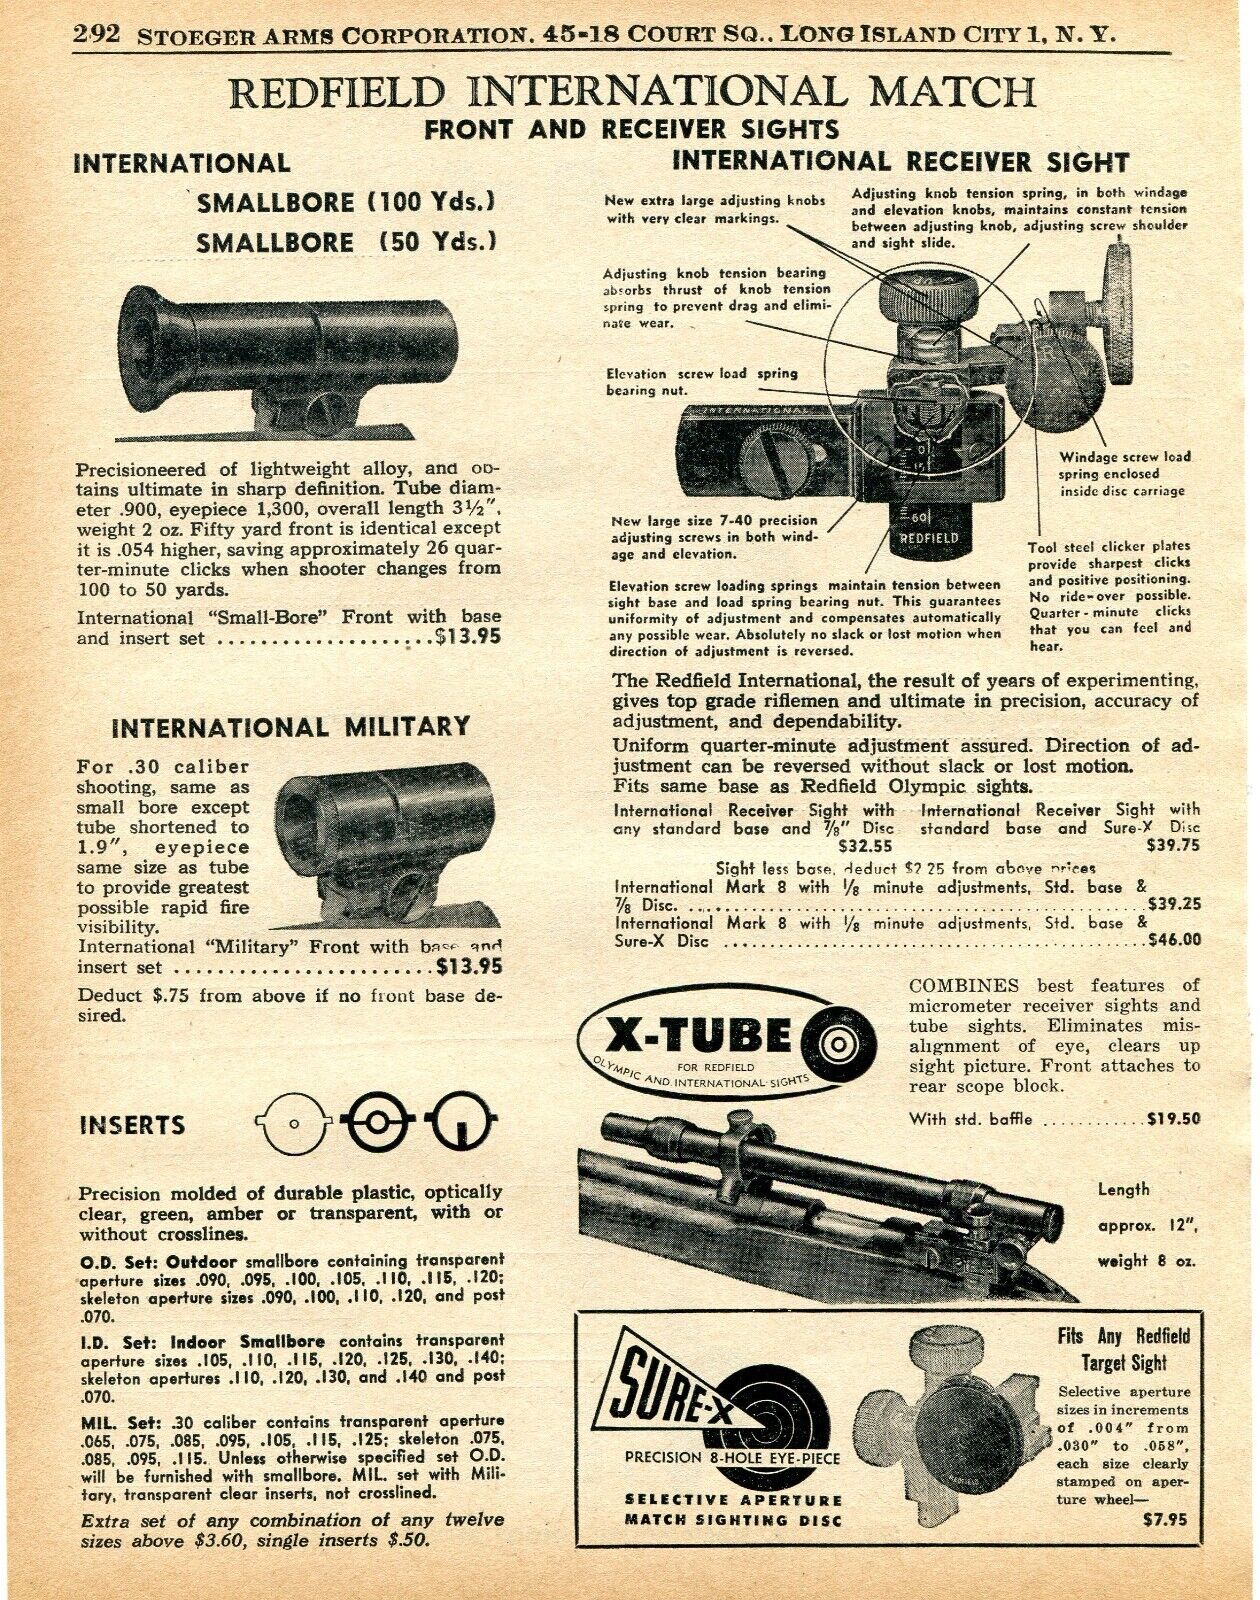 1961 Print Ad of Redfield International Match Rifle Front & Receiver Sights